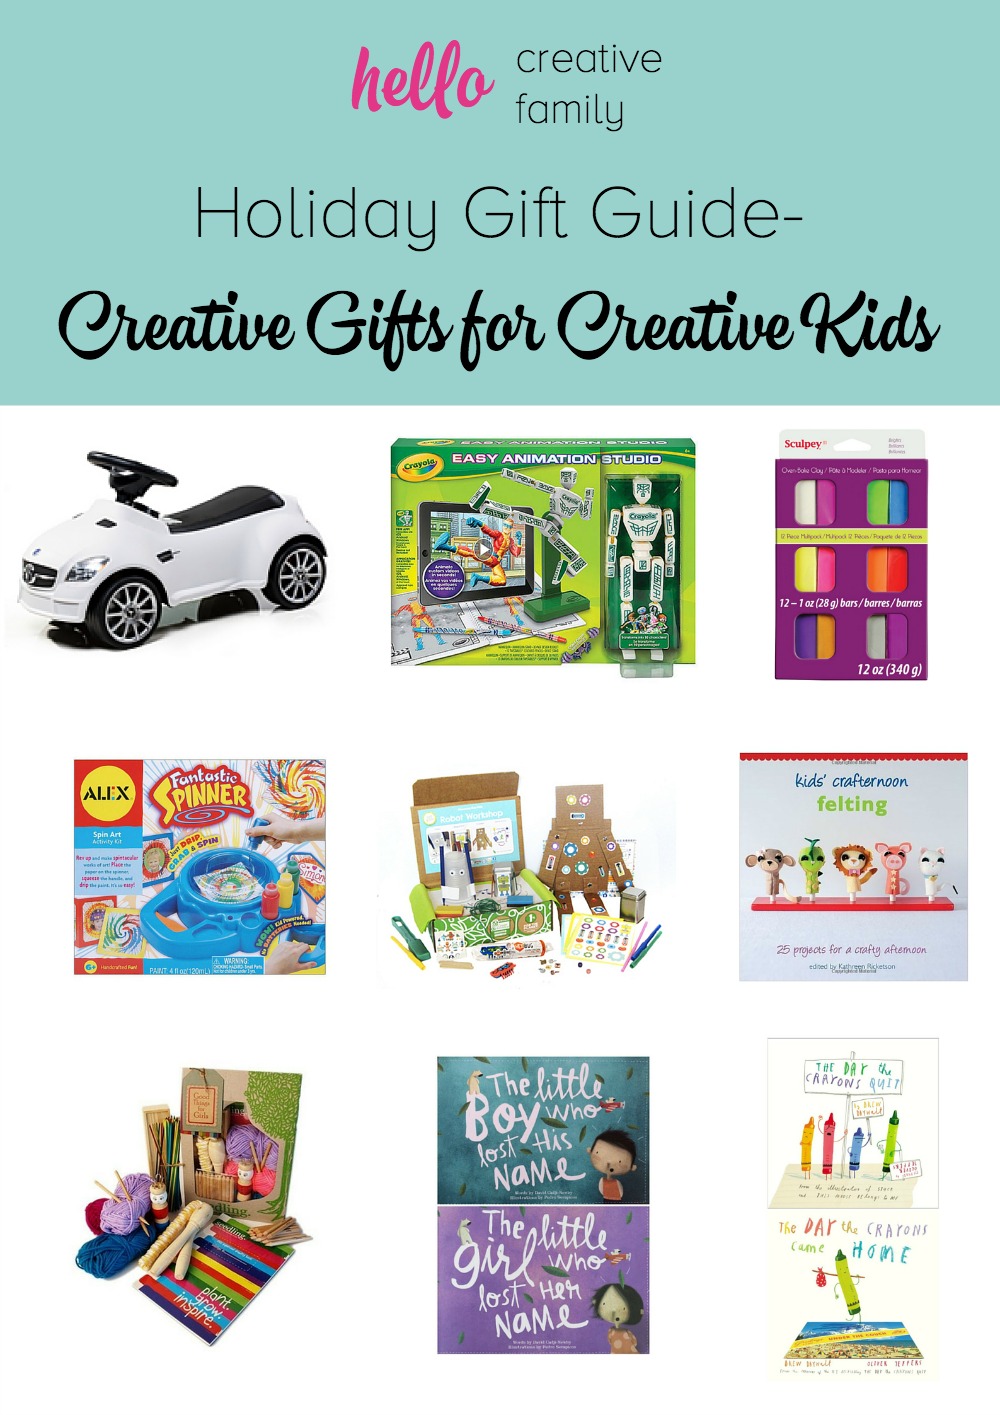 Hello Creative Family Holiday Gift Guide Creative Gifts for Creative Kids